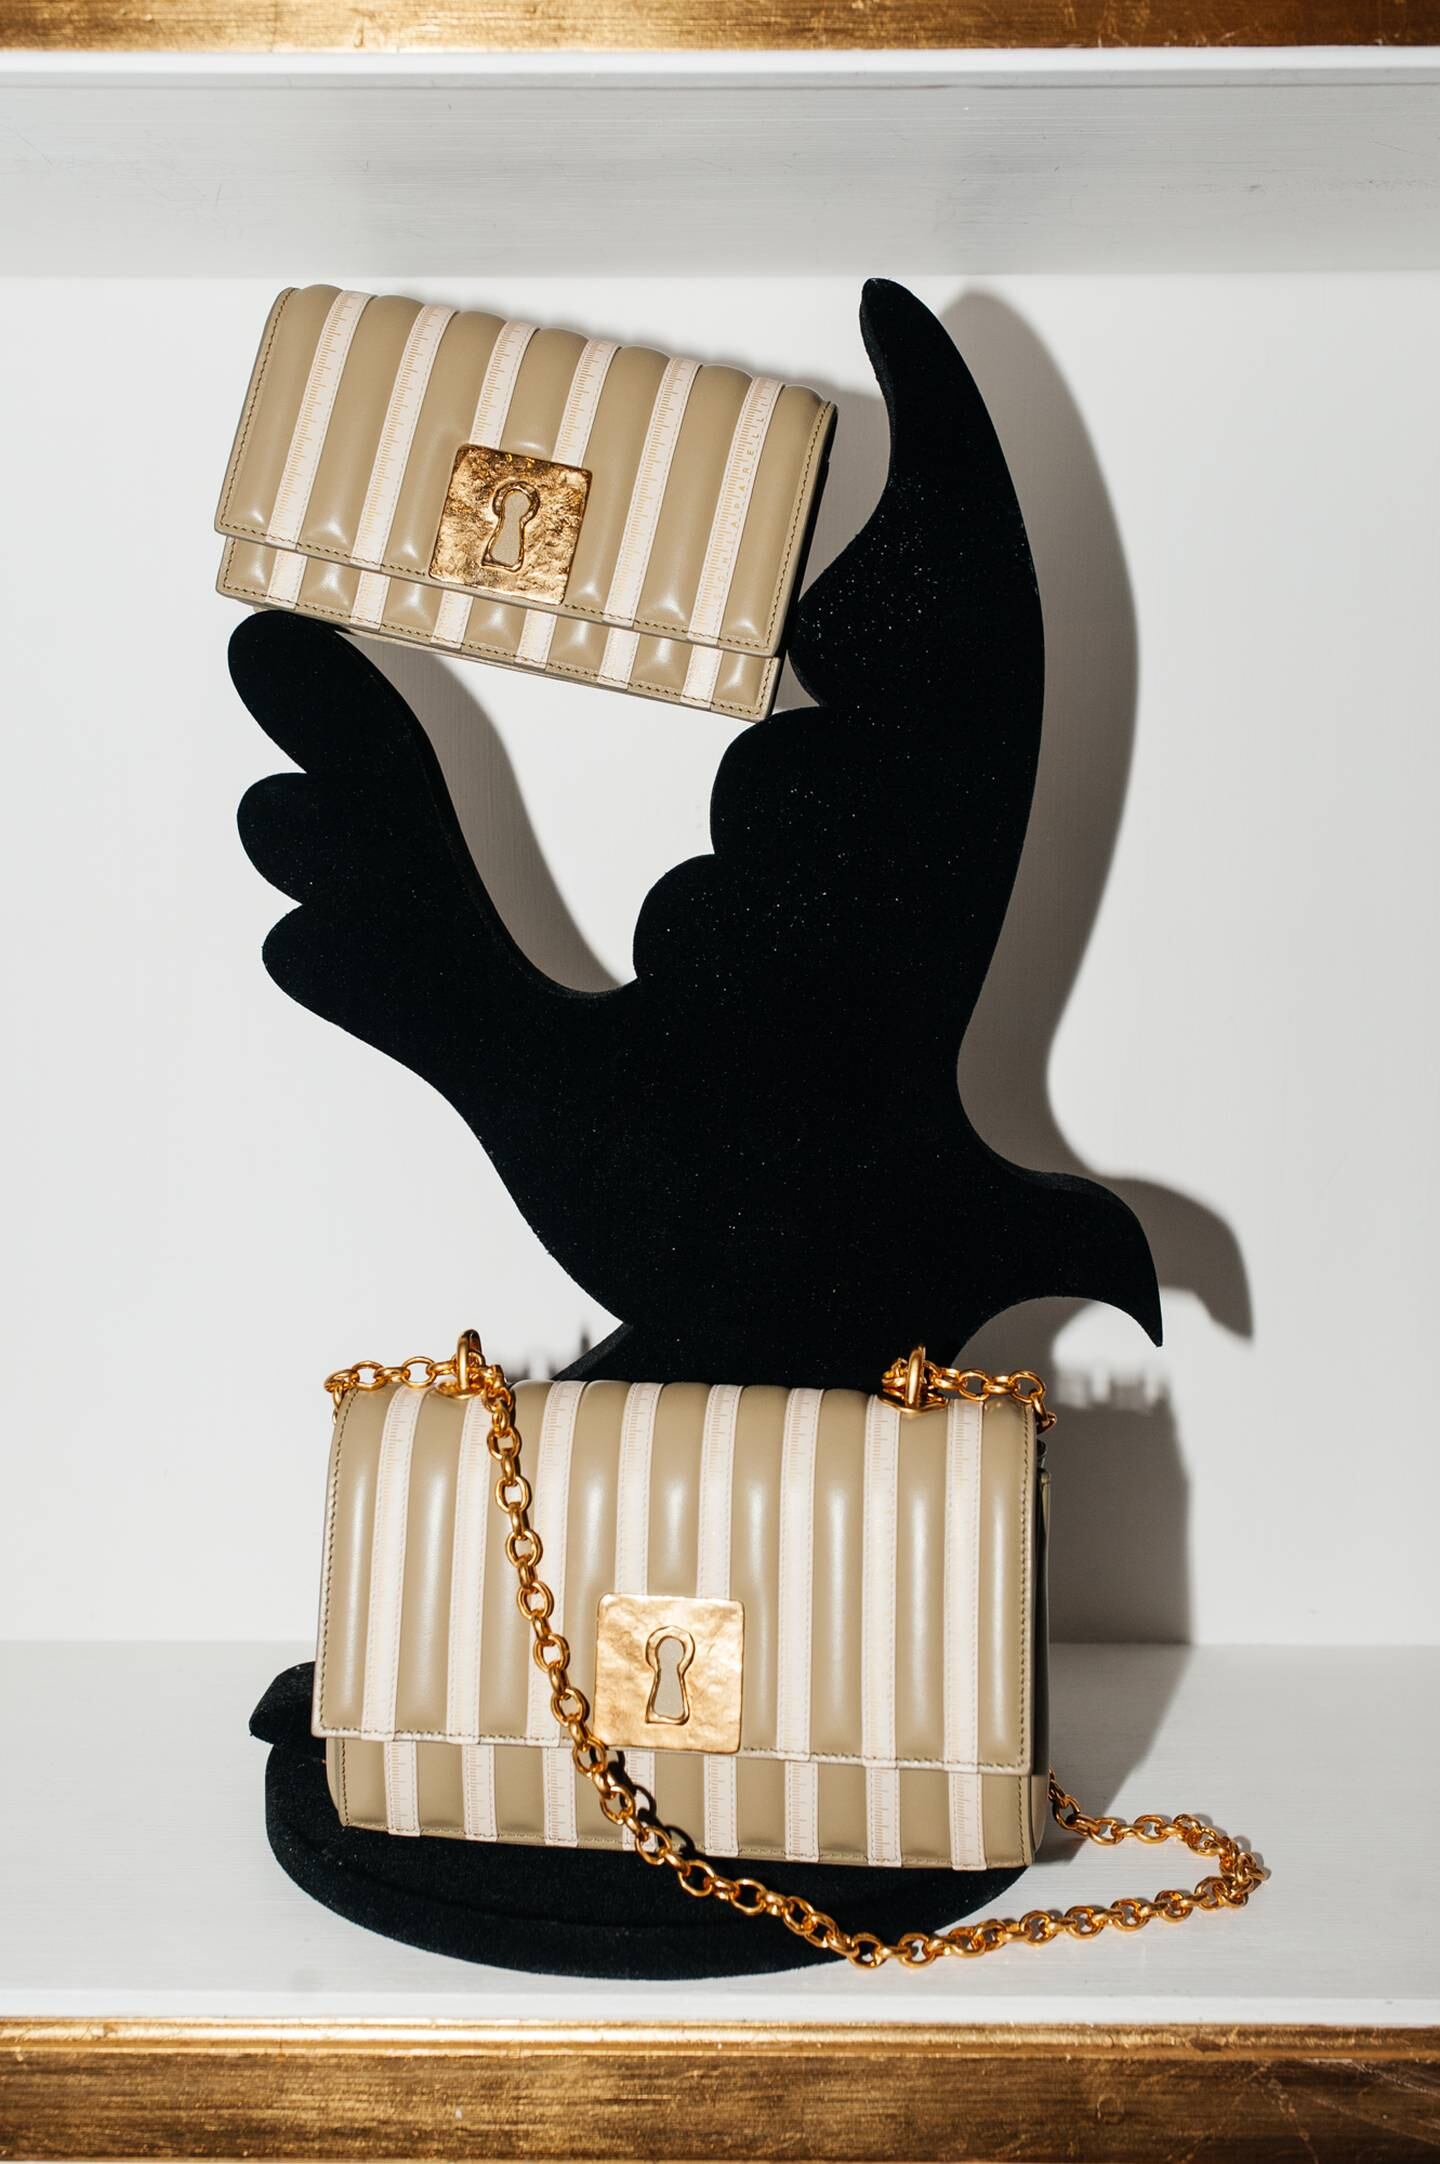 Keyholes and roughly cast bronze are key codes of Schiaparelli's revival, as seen on the brand's new "Schlap" bag.